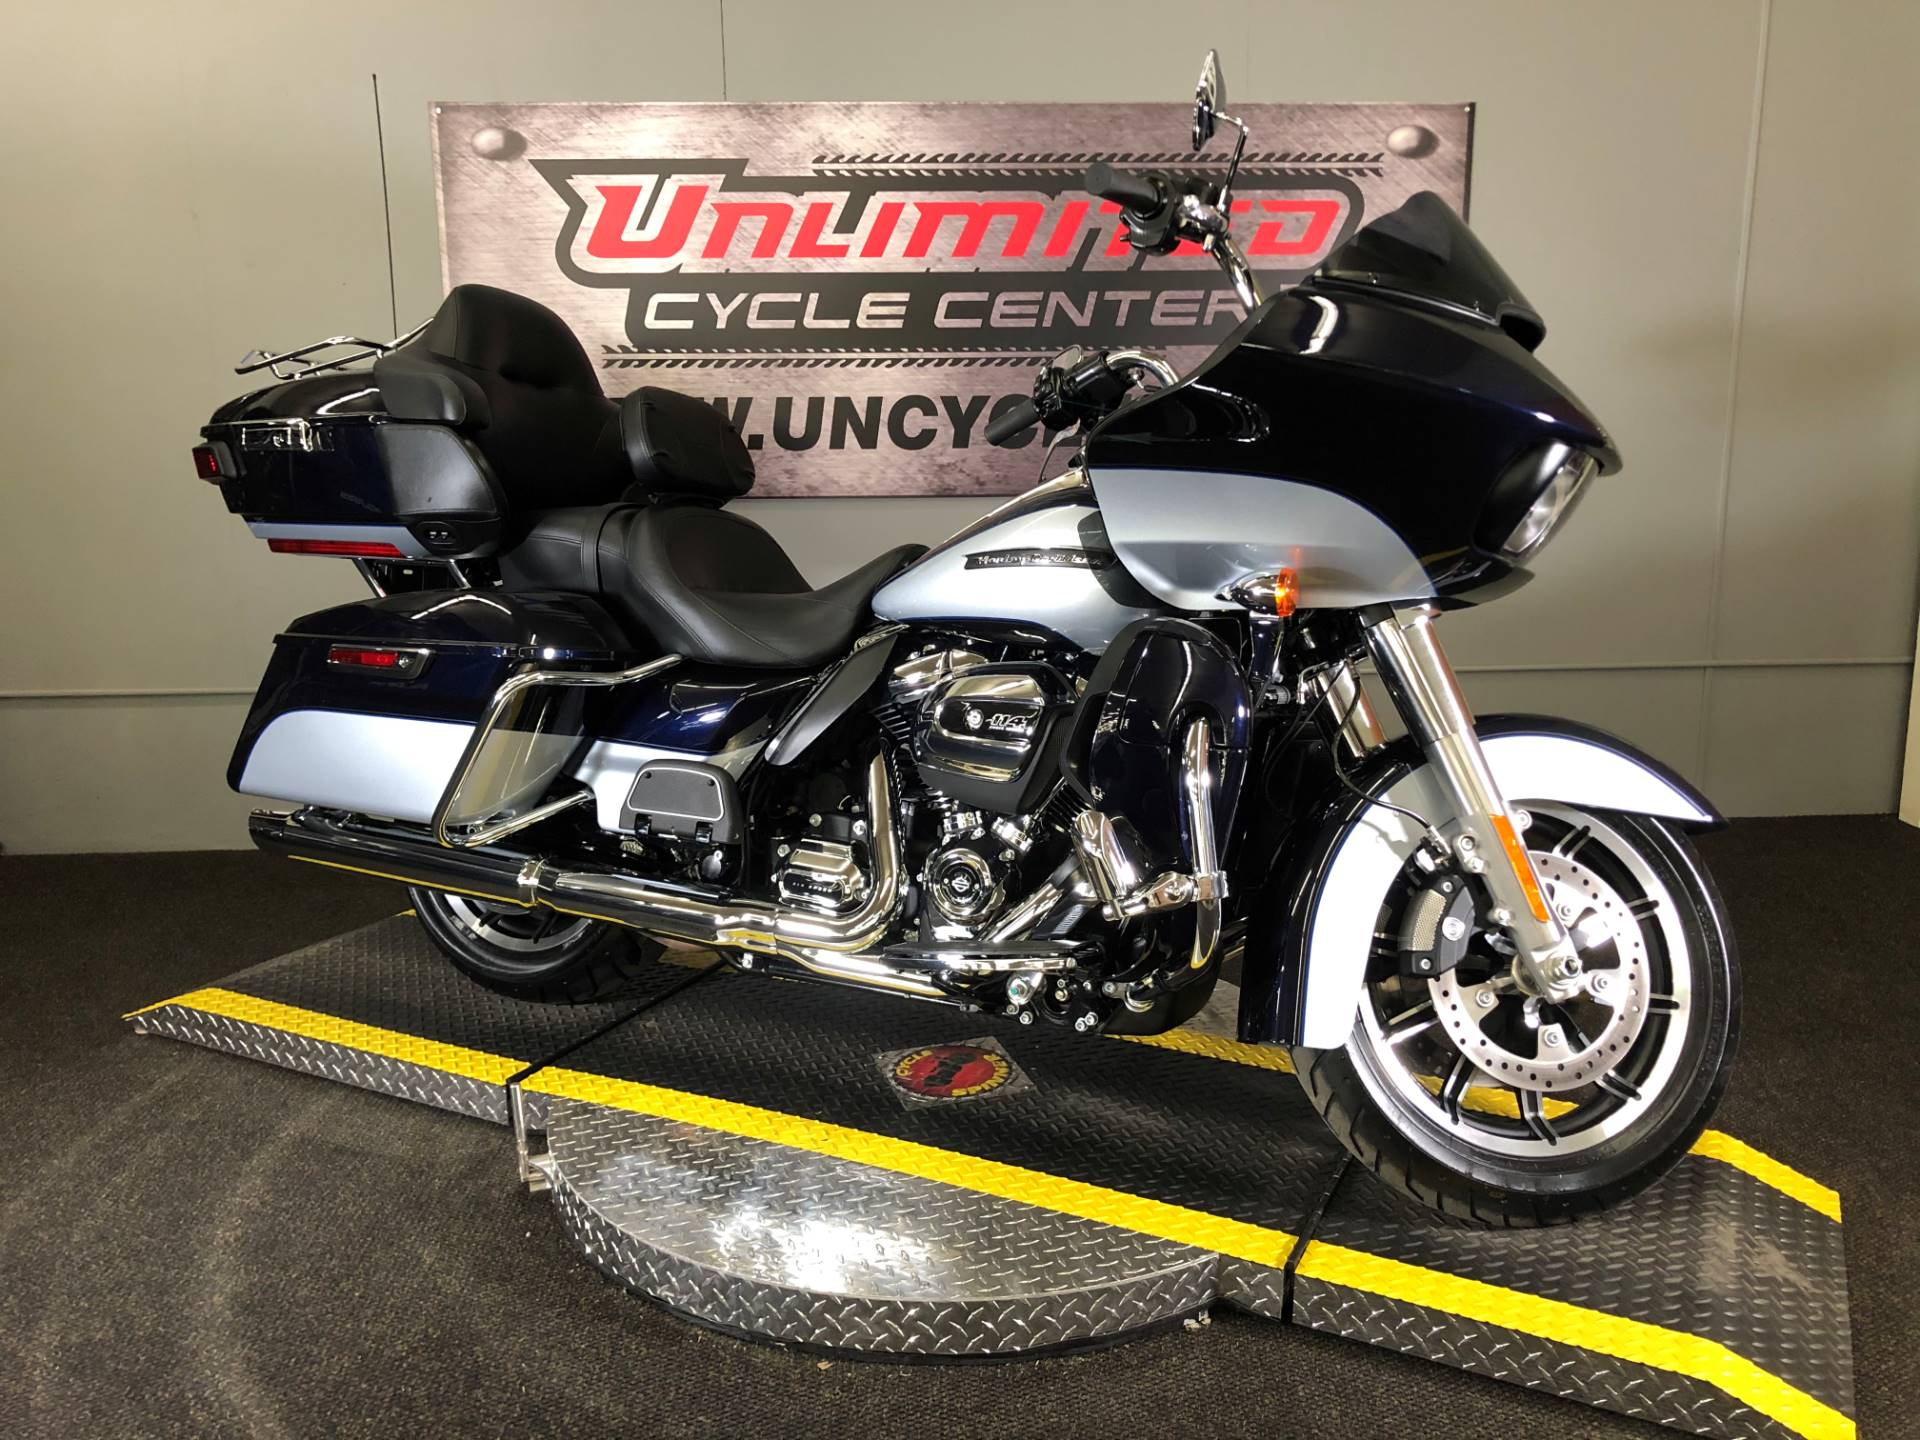 Used 2019 Harley Davidson Road Glide Ultra Motorcycles In Tyrone Pa 647005 Midnight Blue Barracuda Silver